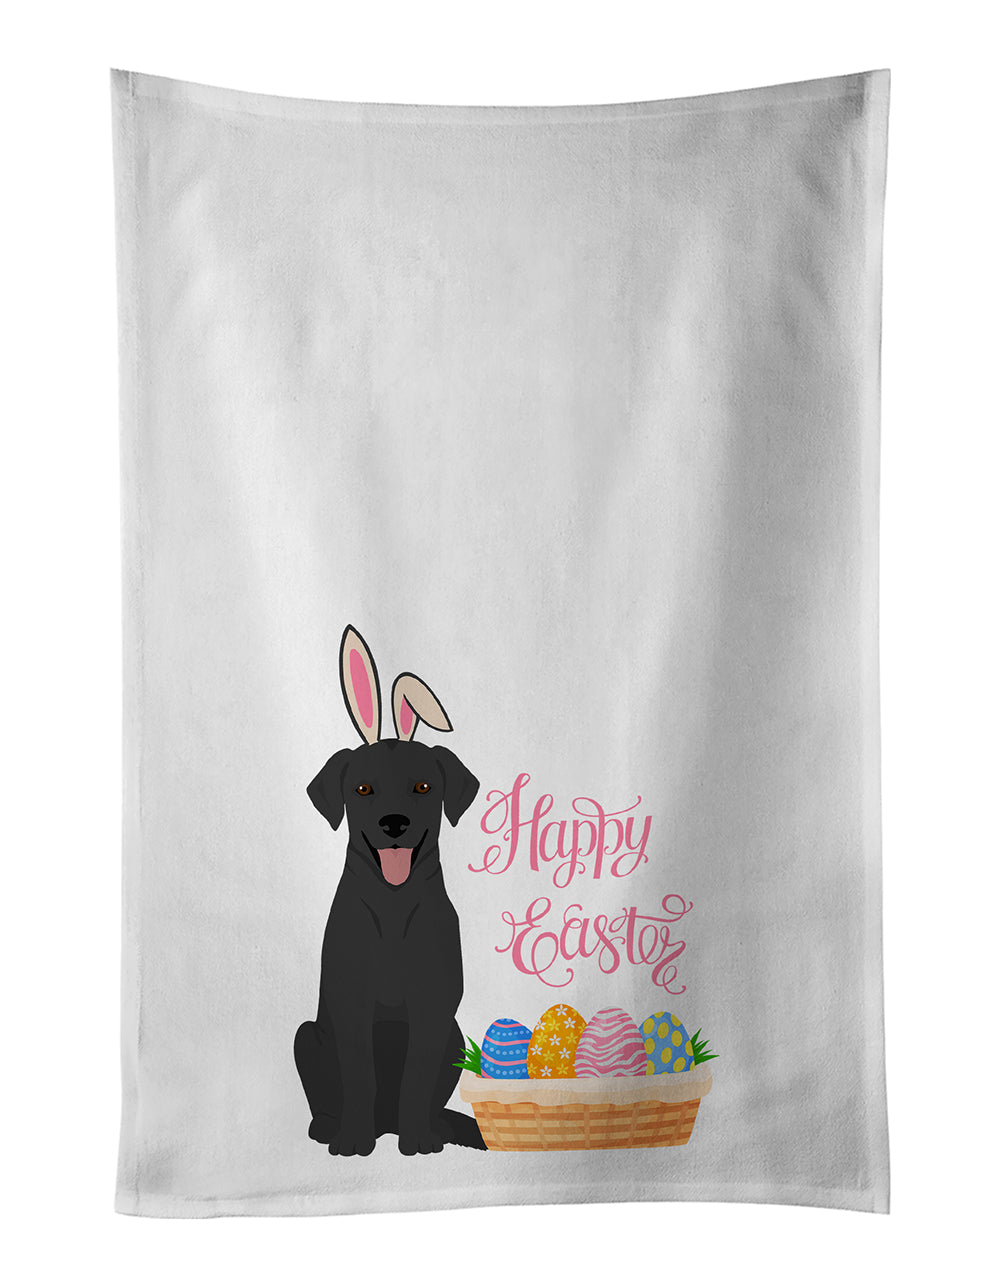 Buy this Black Labrador Retriever Easter White Kitchen Towel Set of 2 Dish Towels